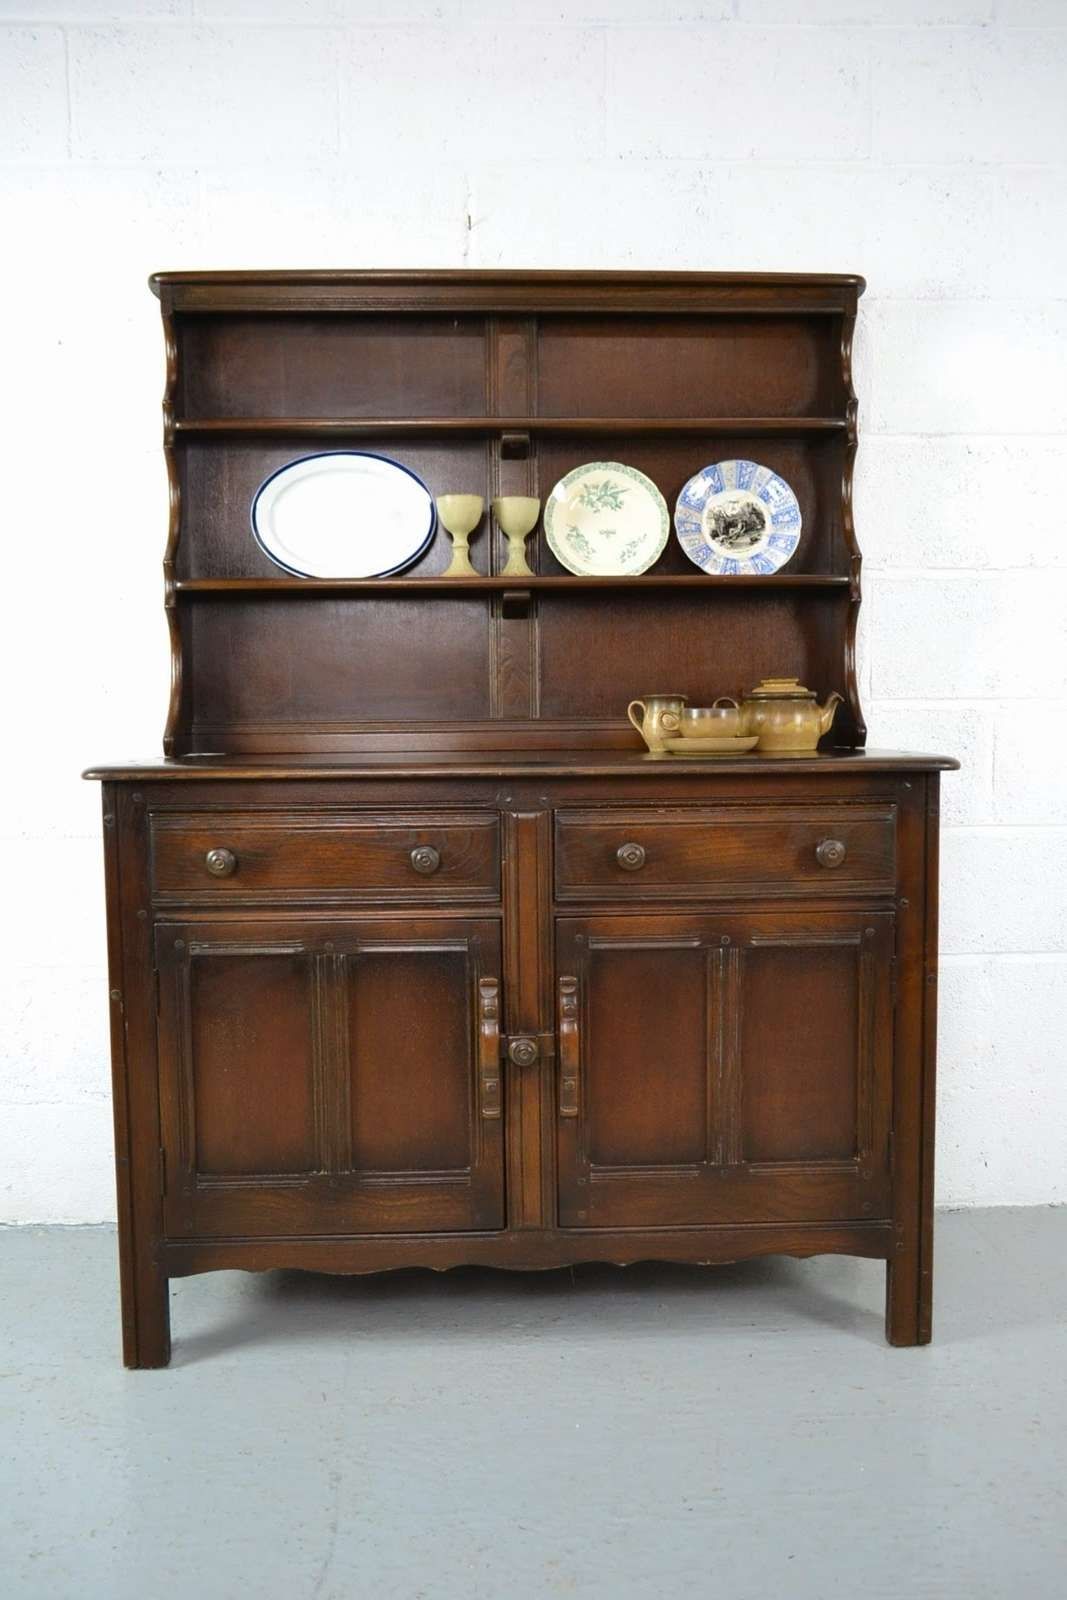 Ercol Kitchen Dresser Throughout Second Hand Dressers And Sideboards (View 14 of 20)